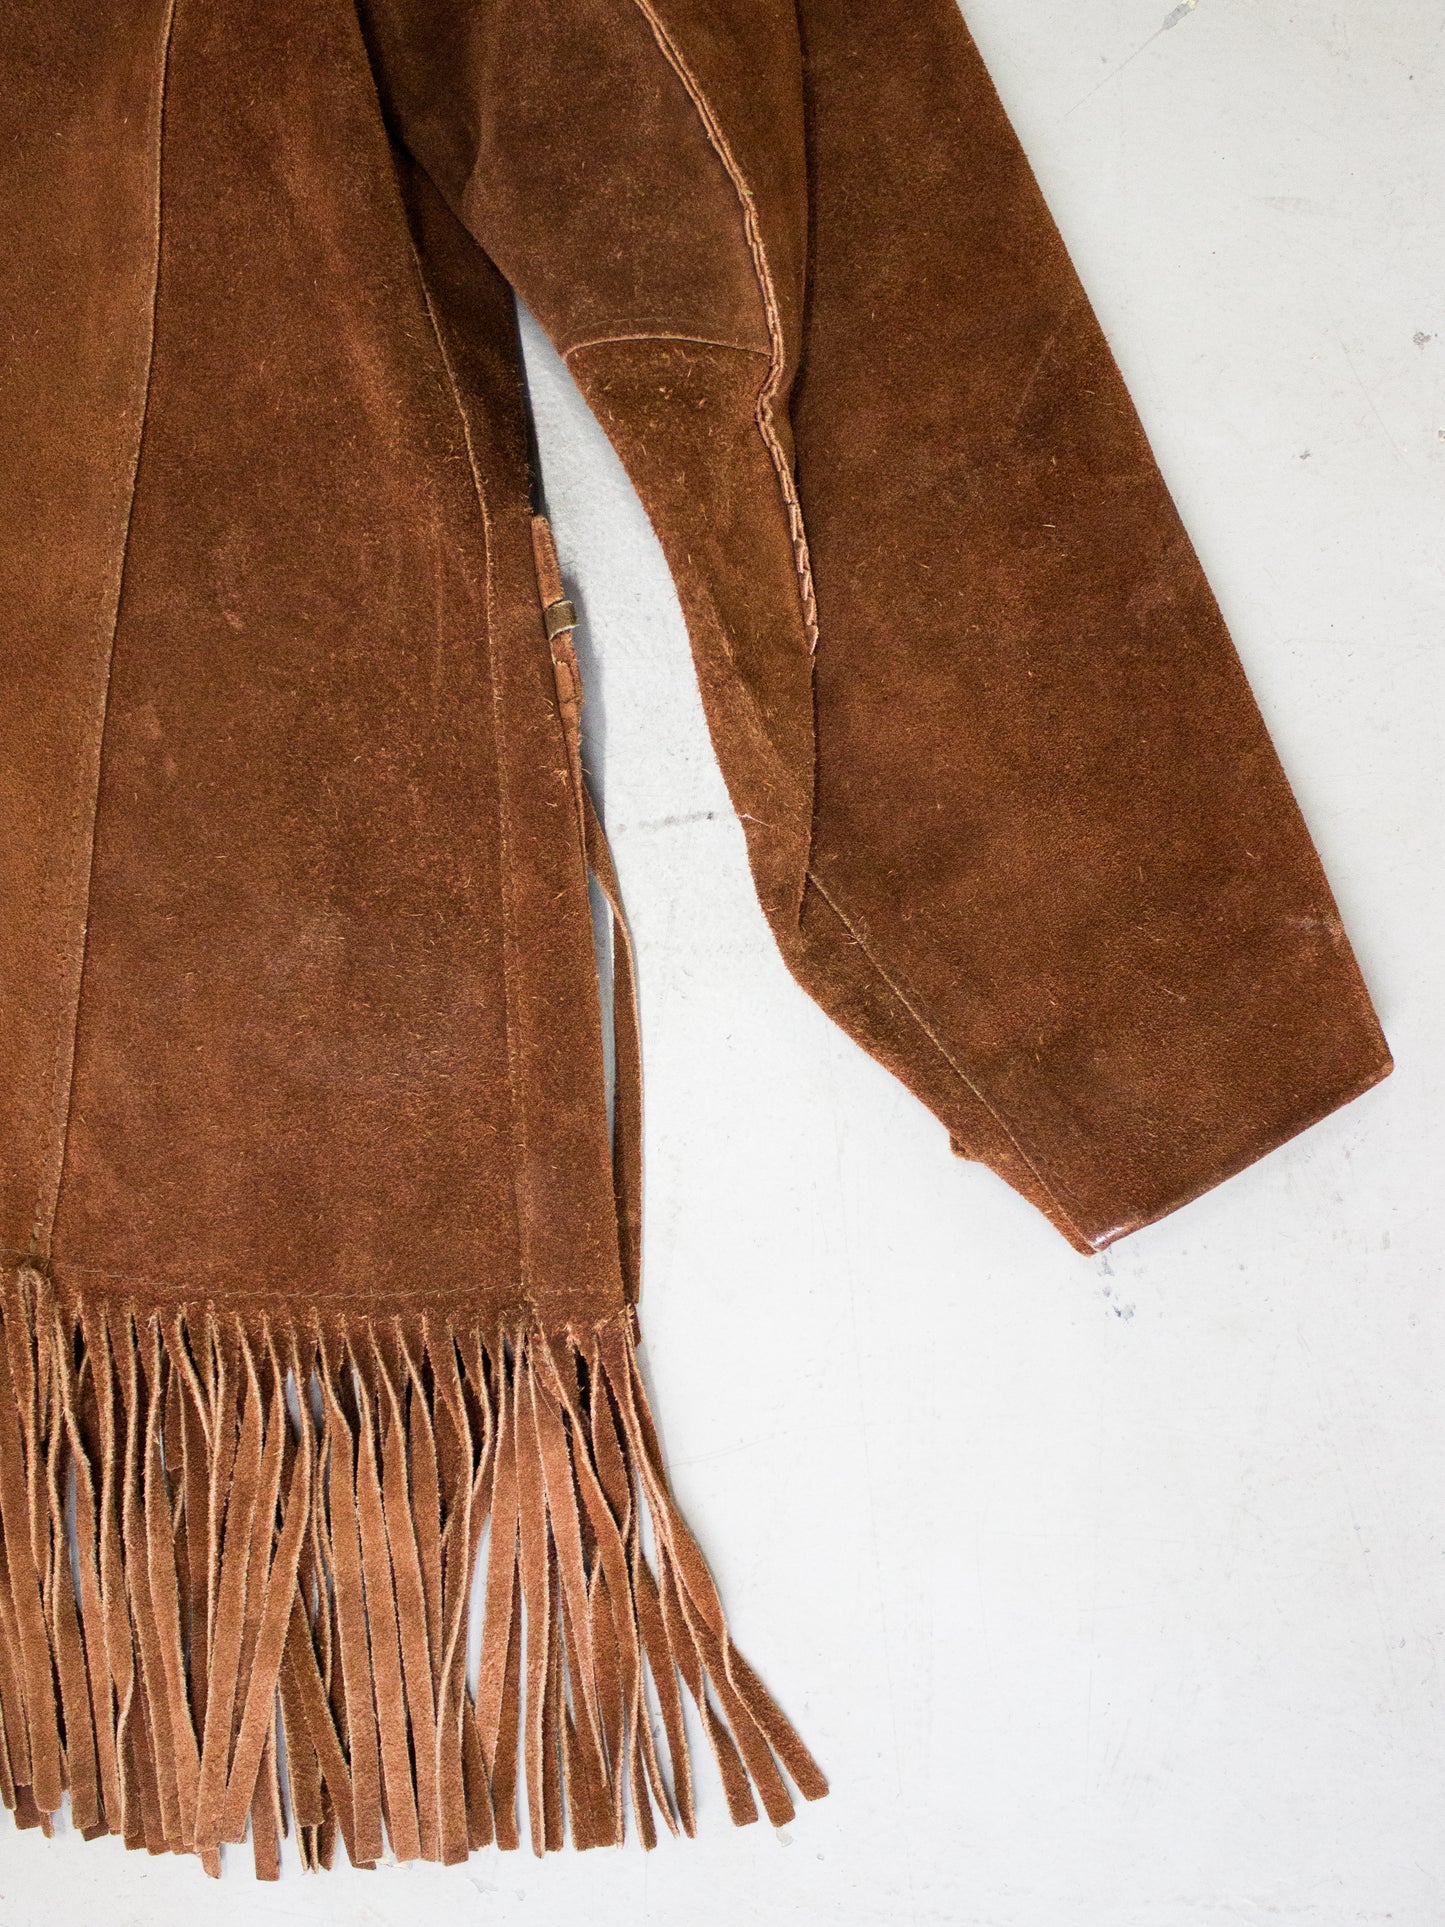 1970's Pioneer Wear Brown Suede Fringe Jacket Made in USA (Men's Small)